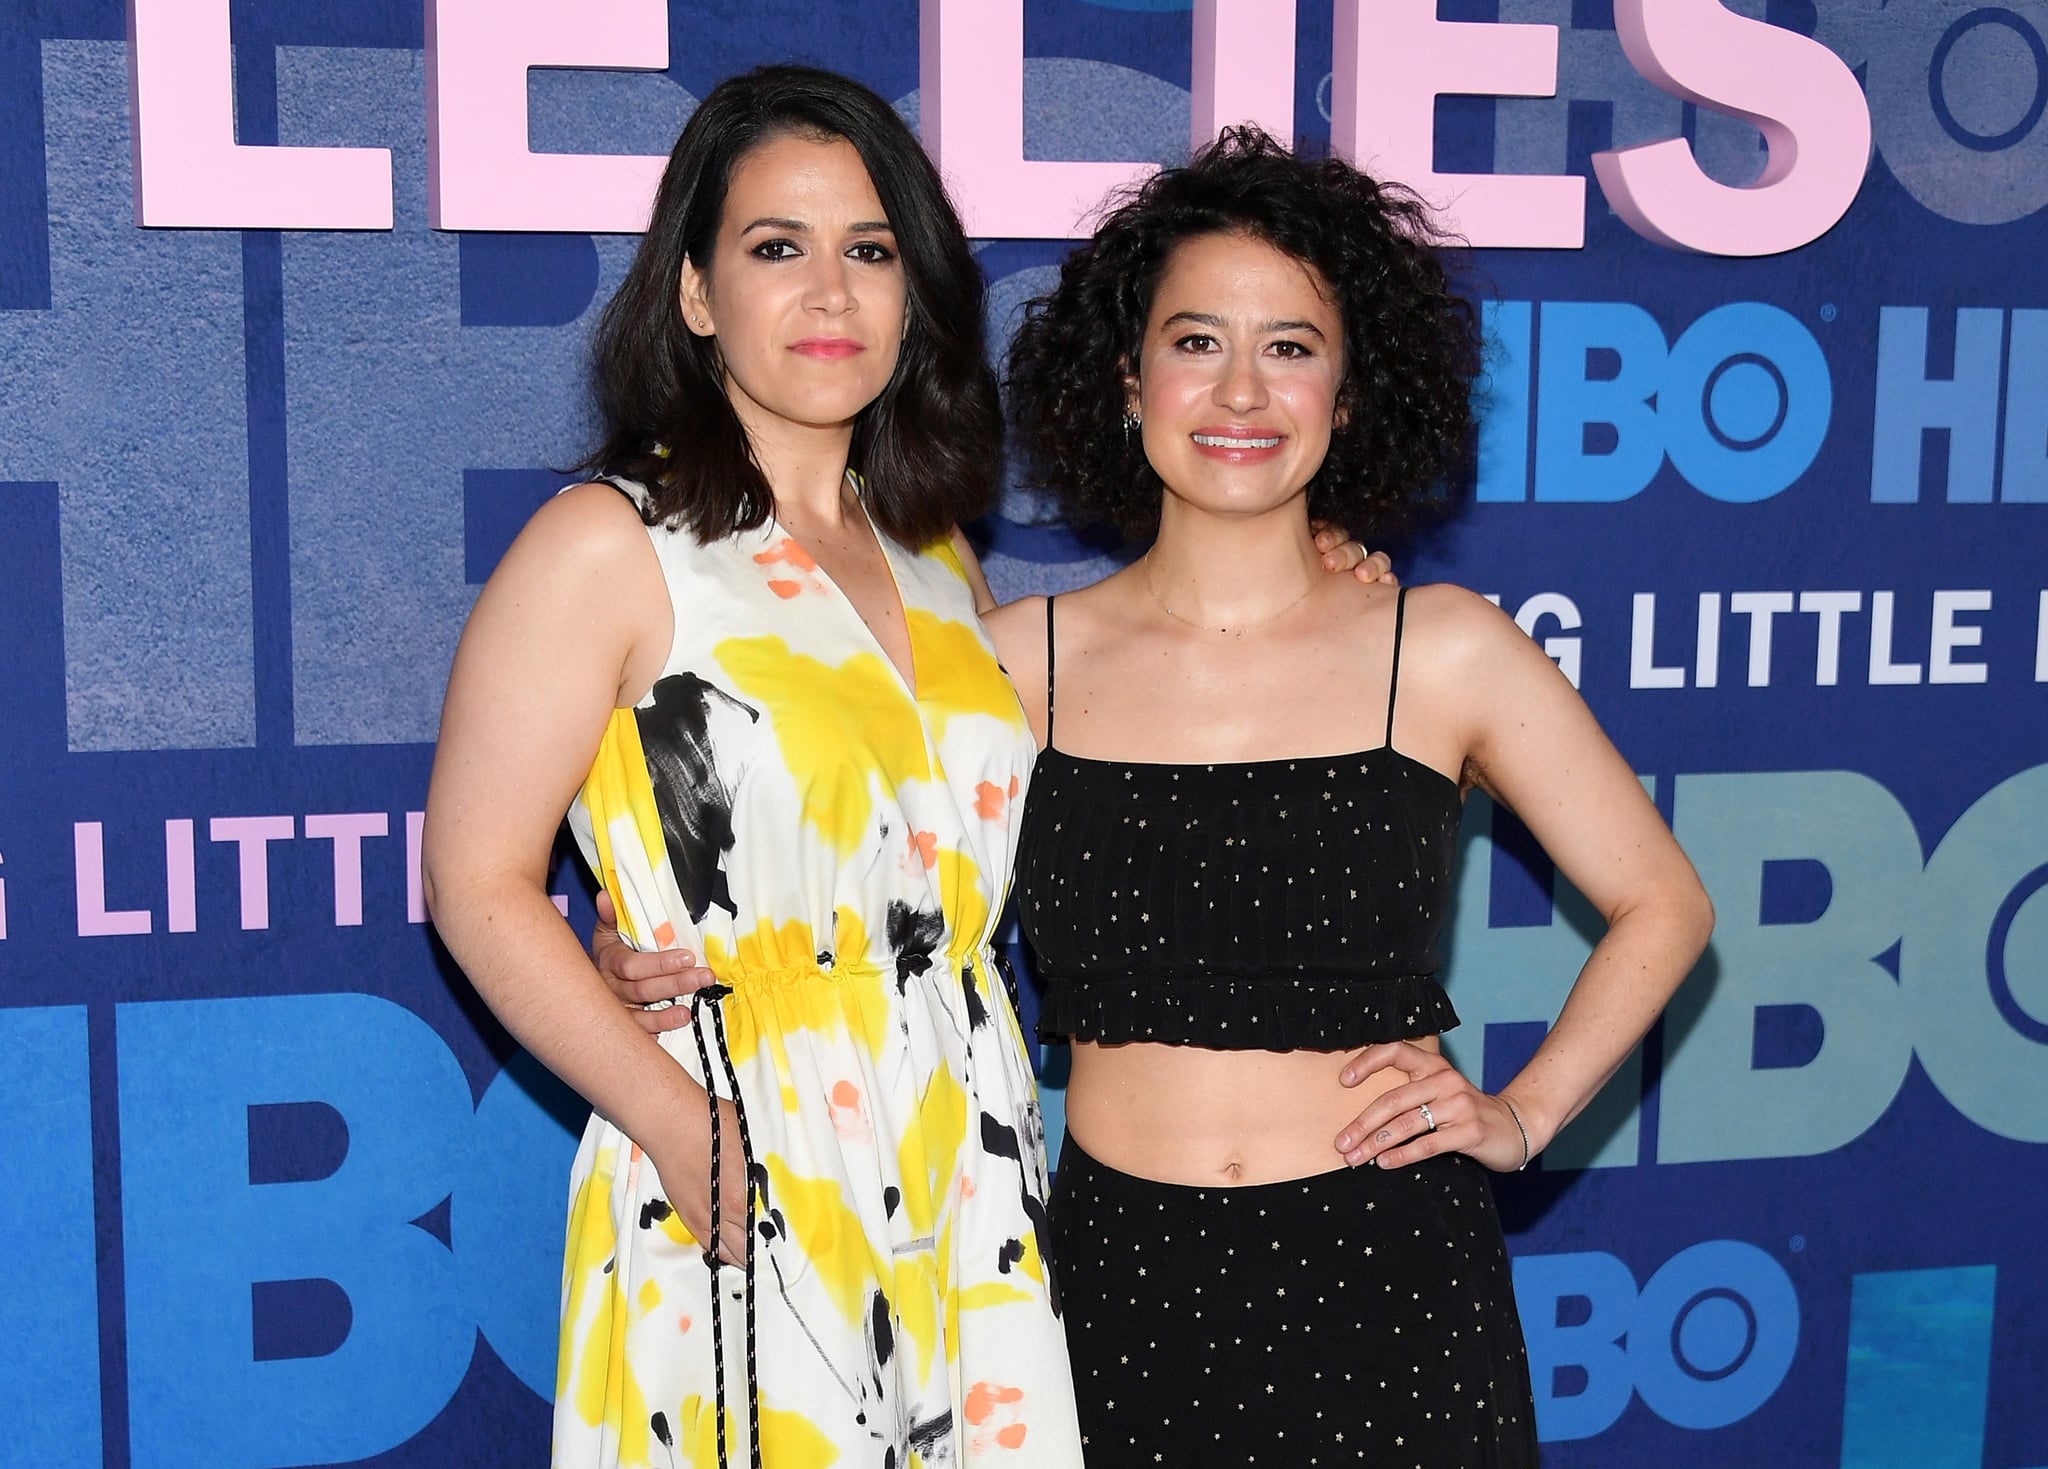 NEW YORK, NEW YORK - MAY 29: Ilana Glazer and Abbi Jacobson attend the 